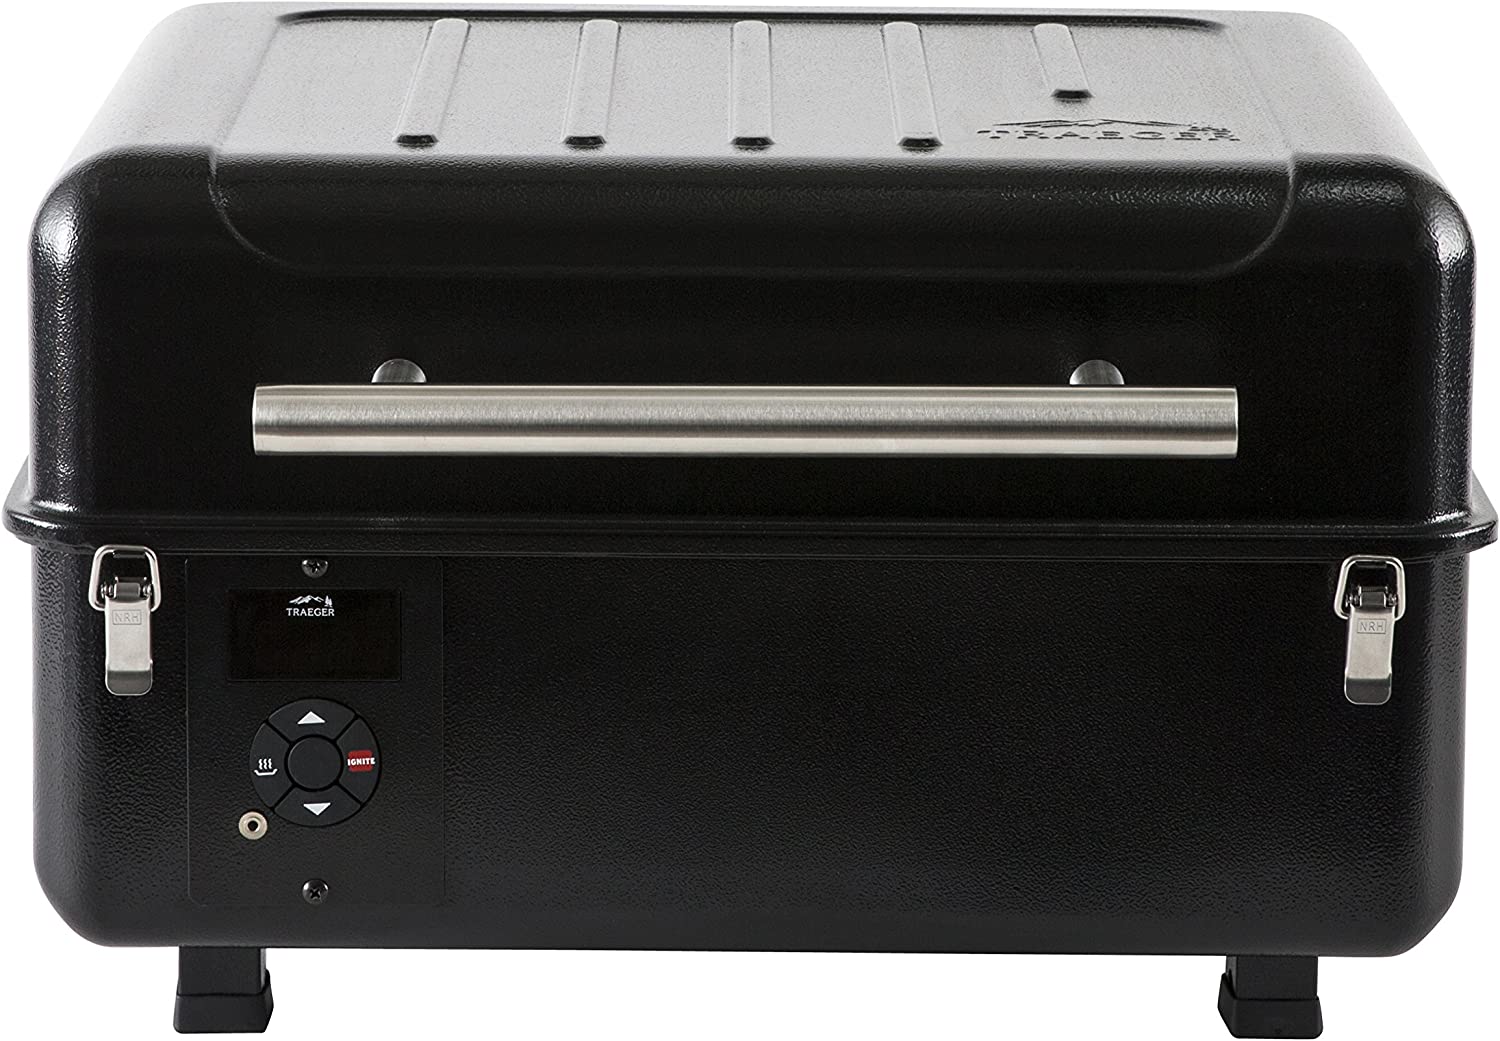 Amazon's Choice: Traeger Grills Ranger Portable Wood Pellet Grill and Smoker Review